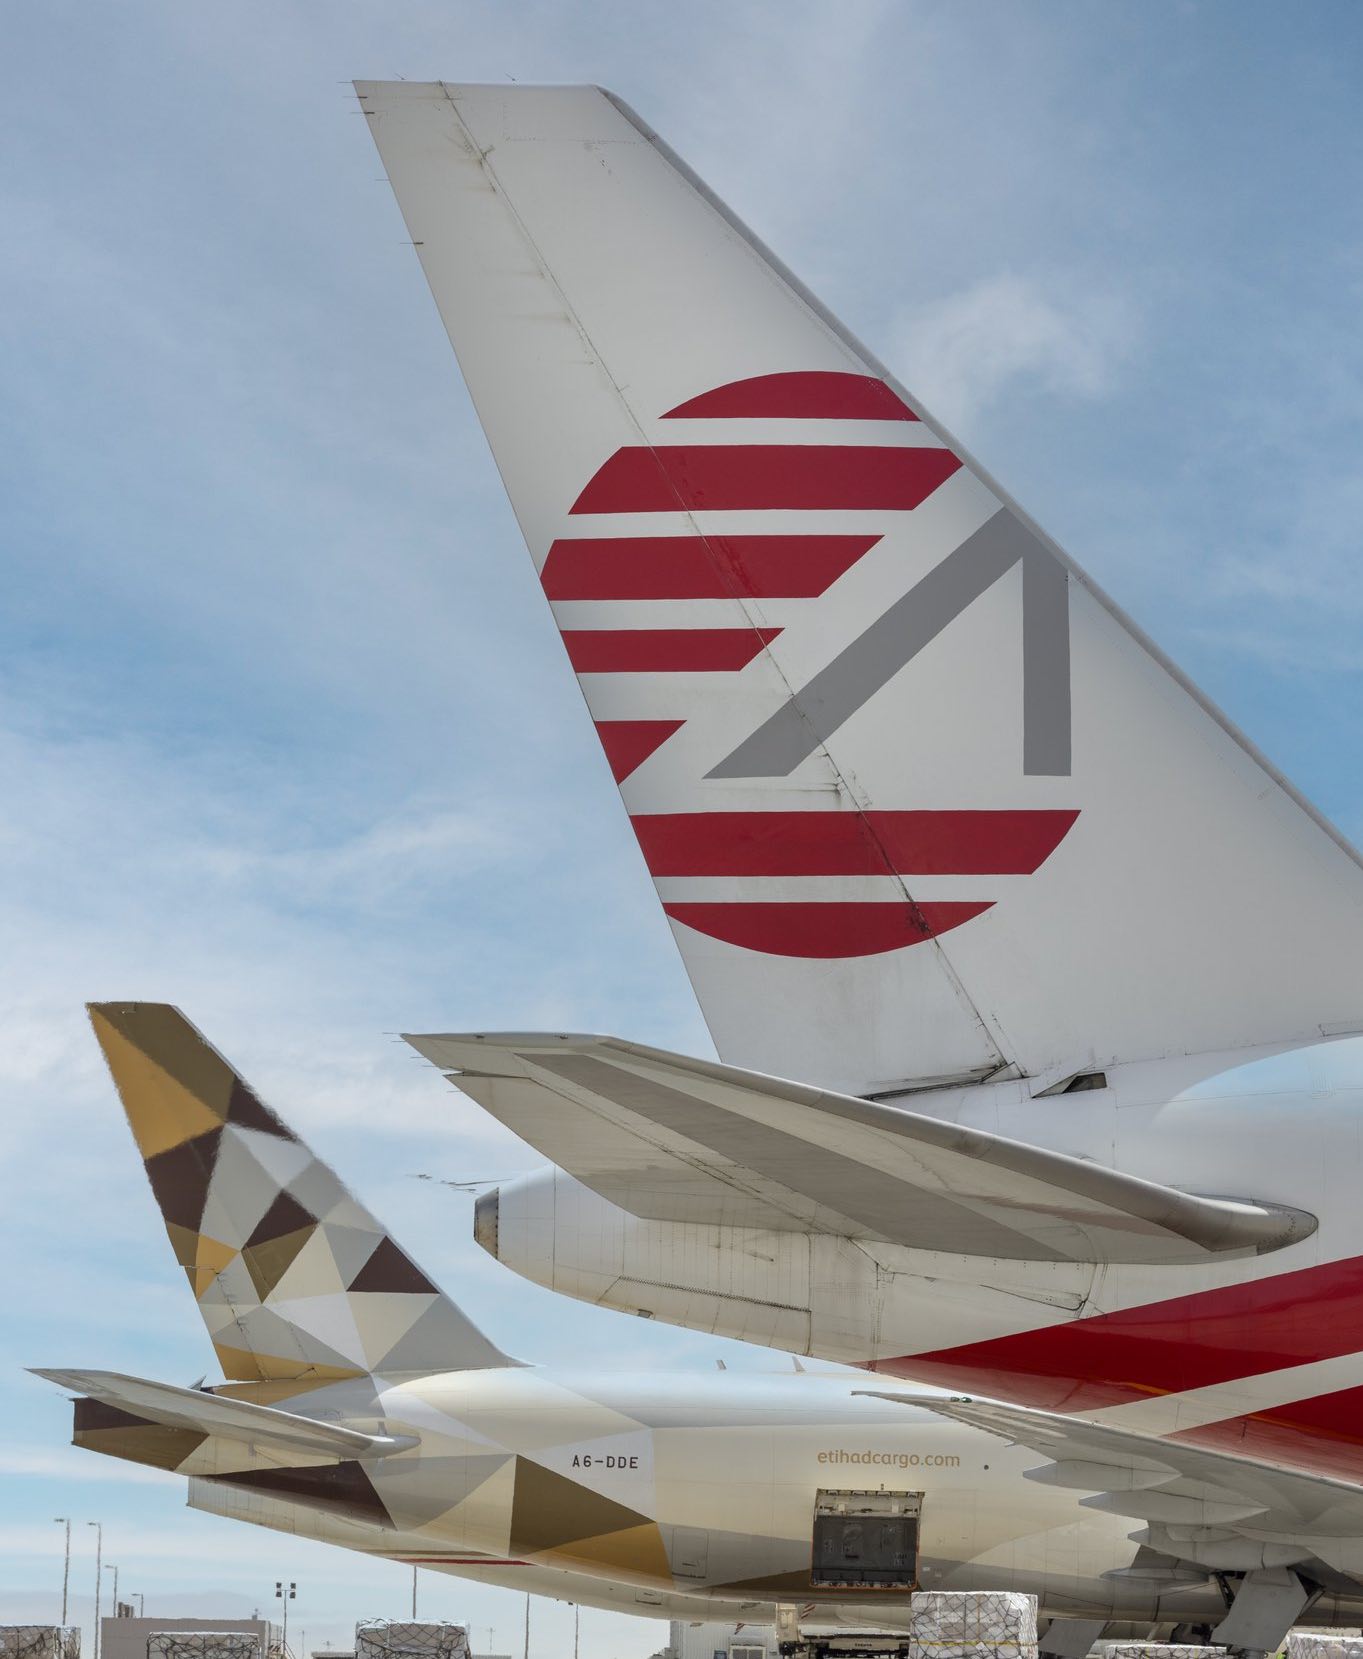 Astral Aviation and Etihad Cargo launch freighter service